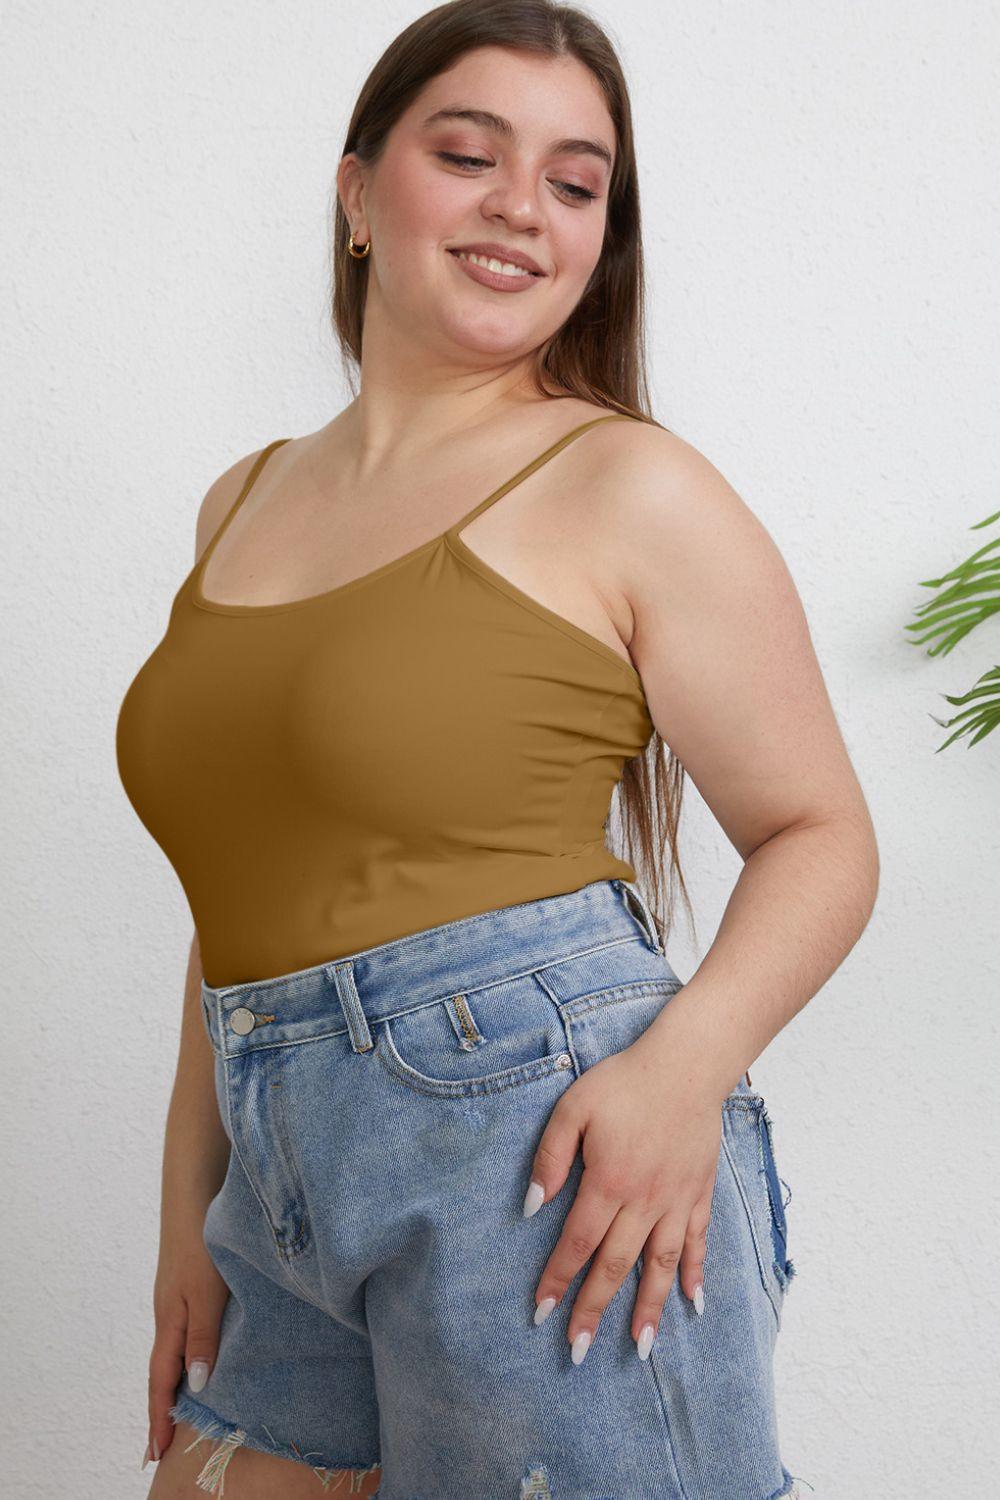 a woman in a tan tank top is posing for the camera